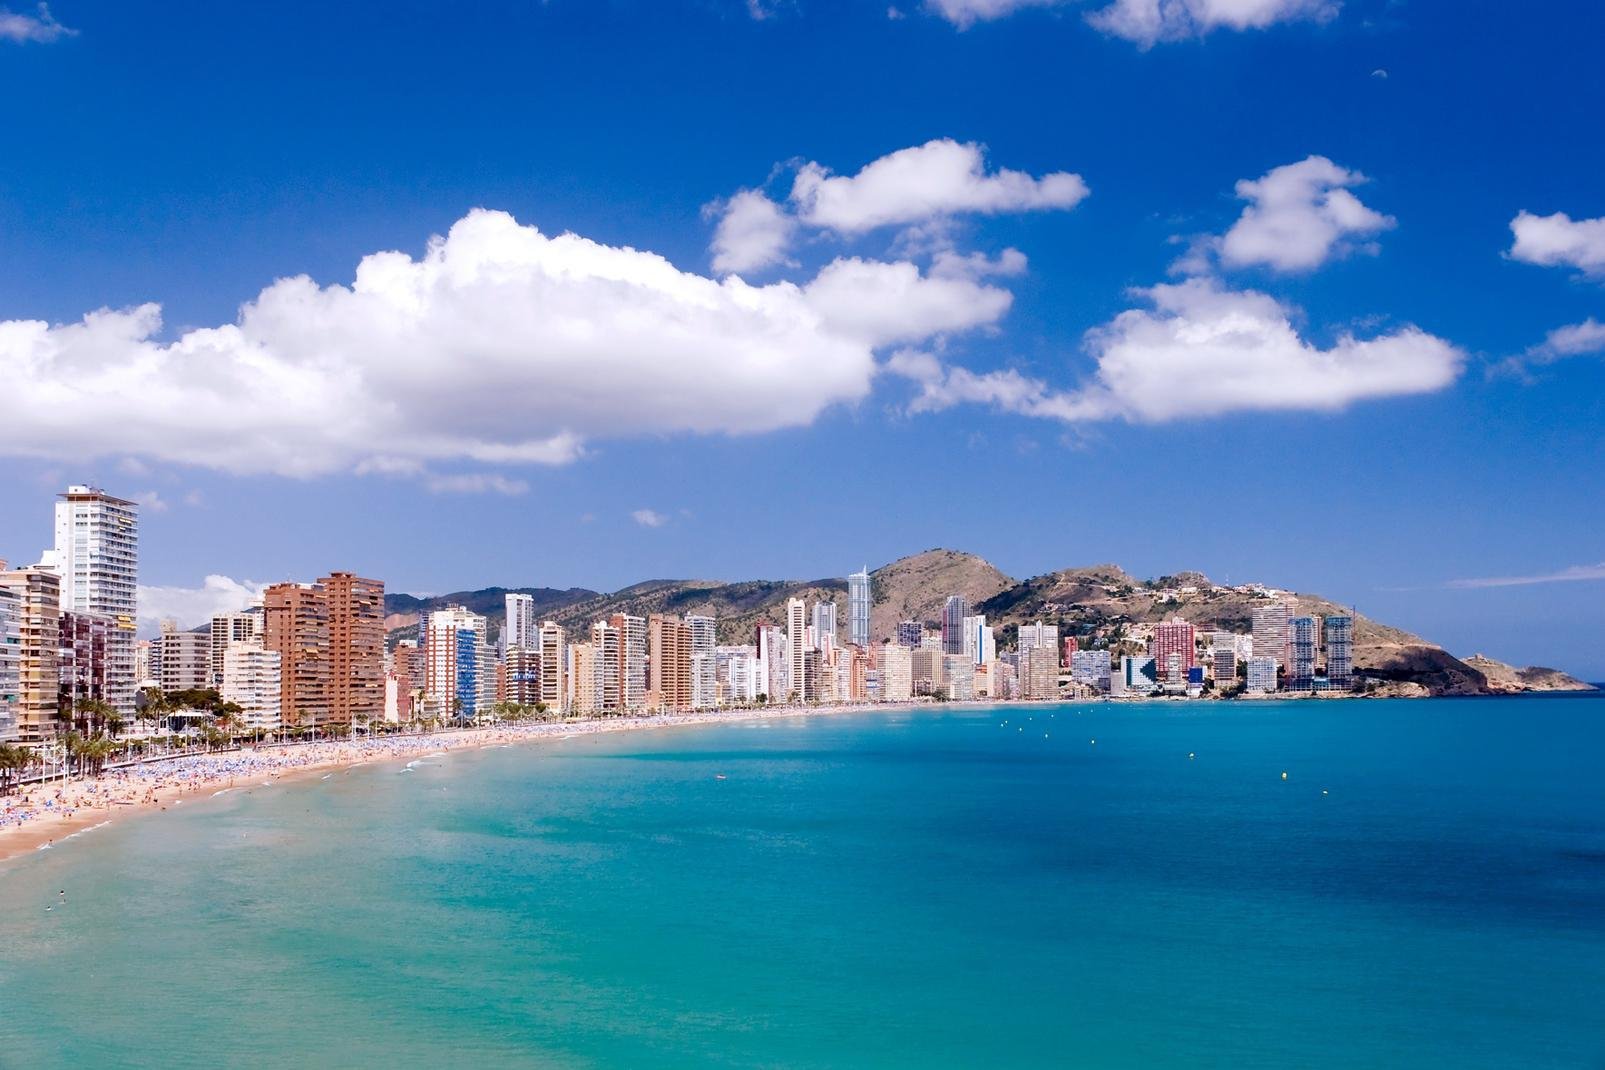 The seaside town of Benidorm attracts those in search of sea and sand. This destination in the famous Costa Blanca has been enjoying a wave of popularity since the 70s. When admiring the town from afar, you can see that around a hundred hotels have invaded the promenade. Recently renovated, the promenade is extremely practical as it links the beaches of Levante and Poniente. If you are going to Benidorm, ...